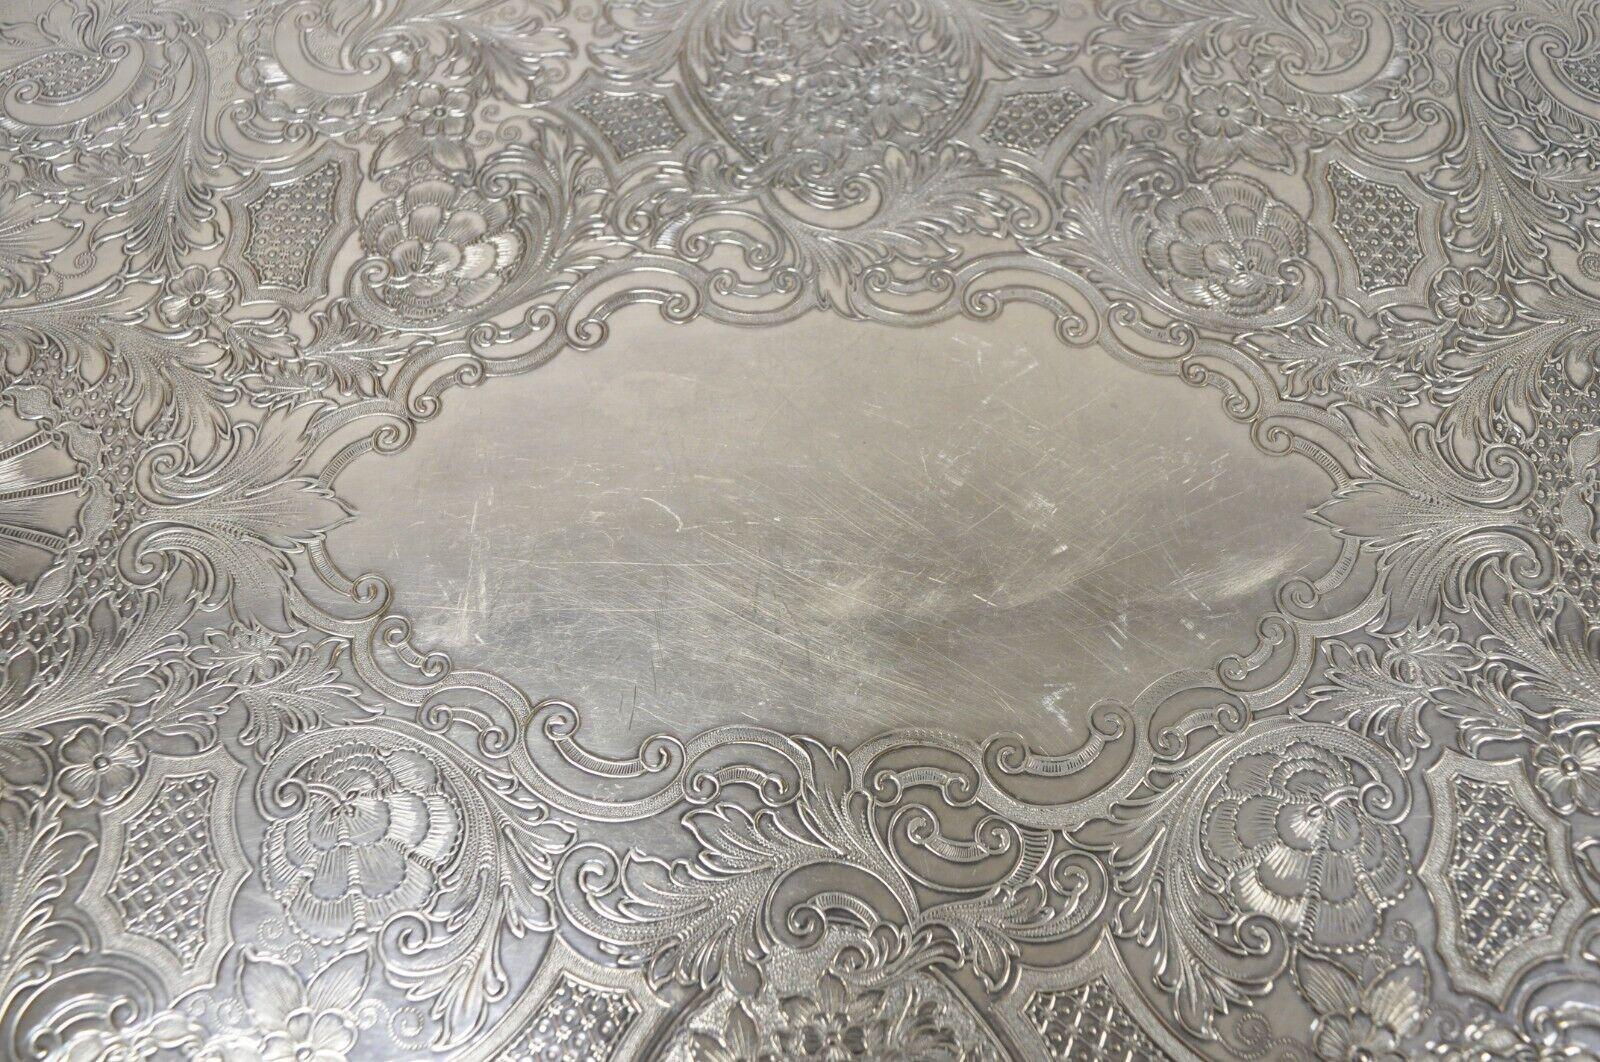 Vintage Heritage 1847 Rogers Bros 9498 Silver Plated Serving Platter Tray For Sale 1